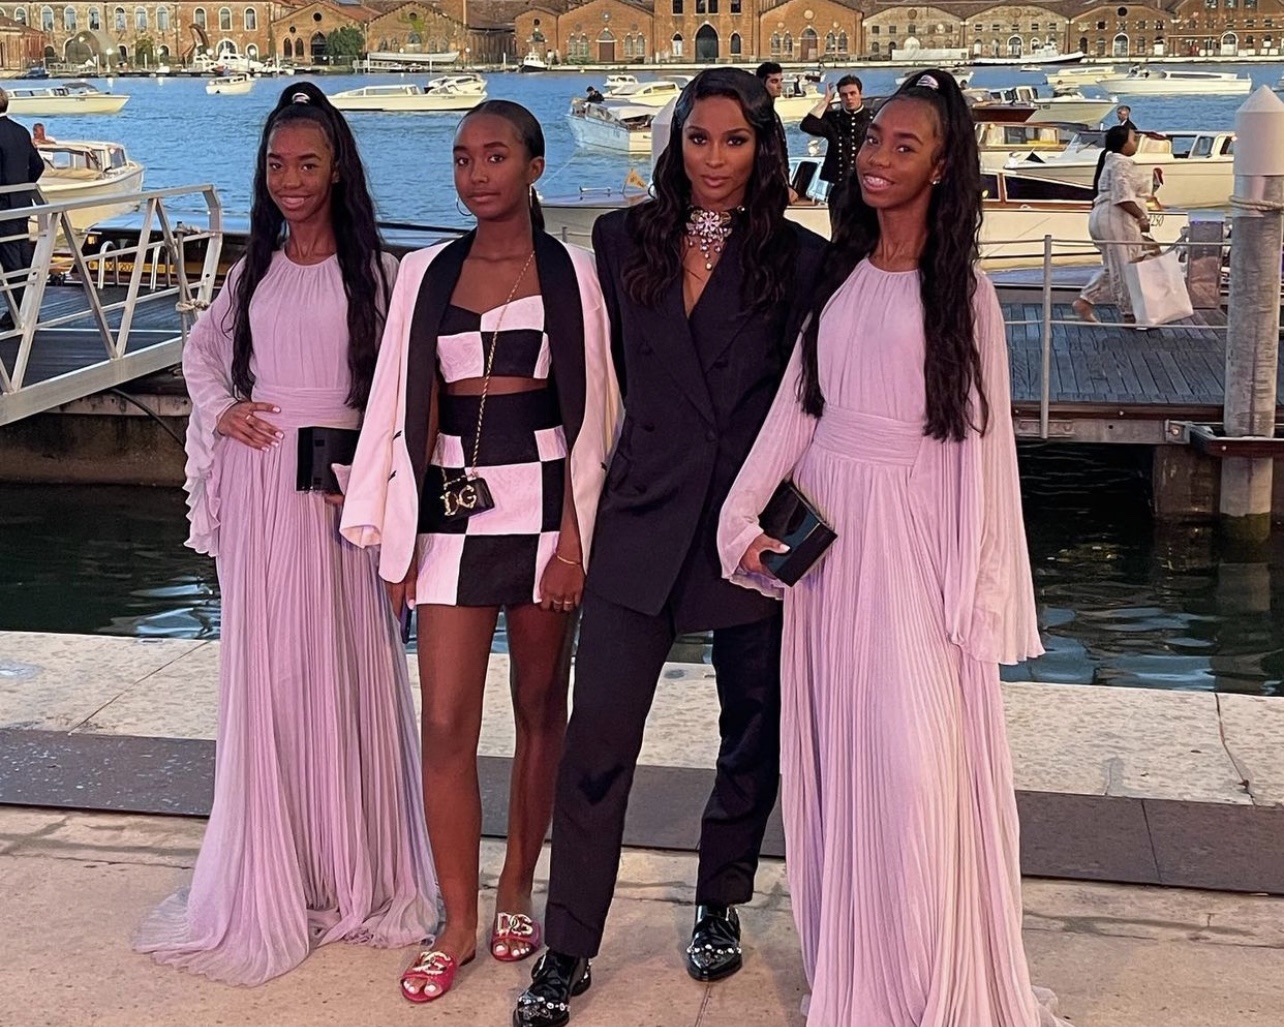 jessie-dlila-combs-and-chance-with-ciara-dolce-and-gabbanas-alta-sartoria-after-party-in-venice-italy